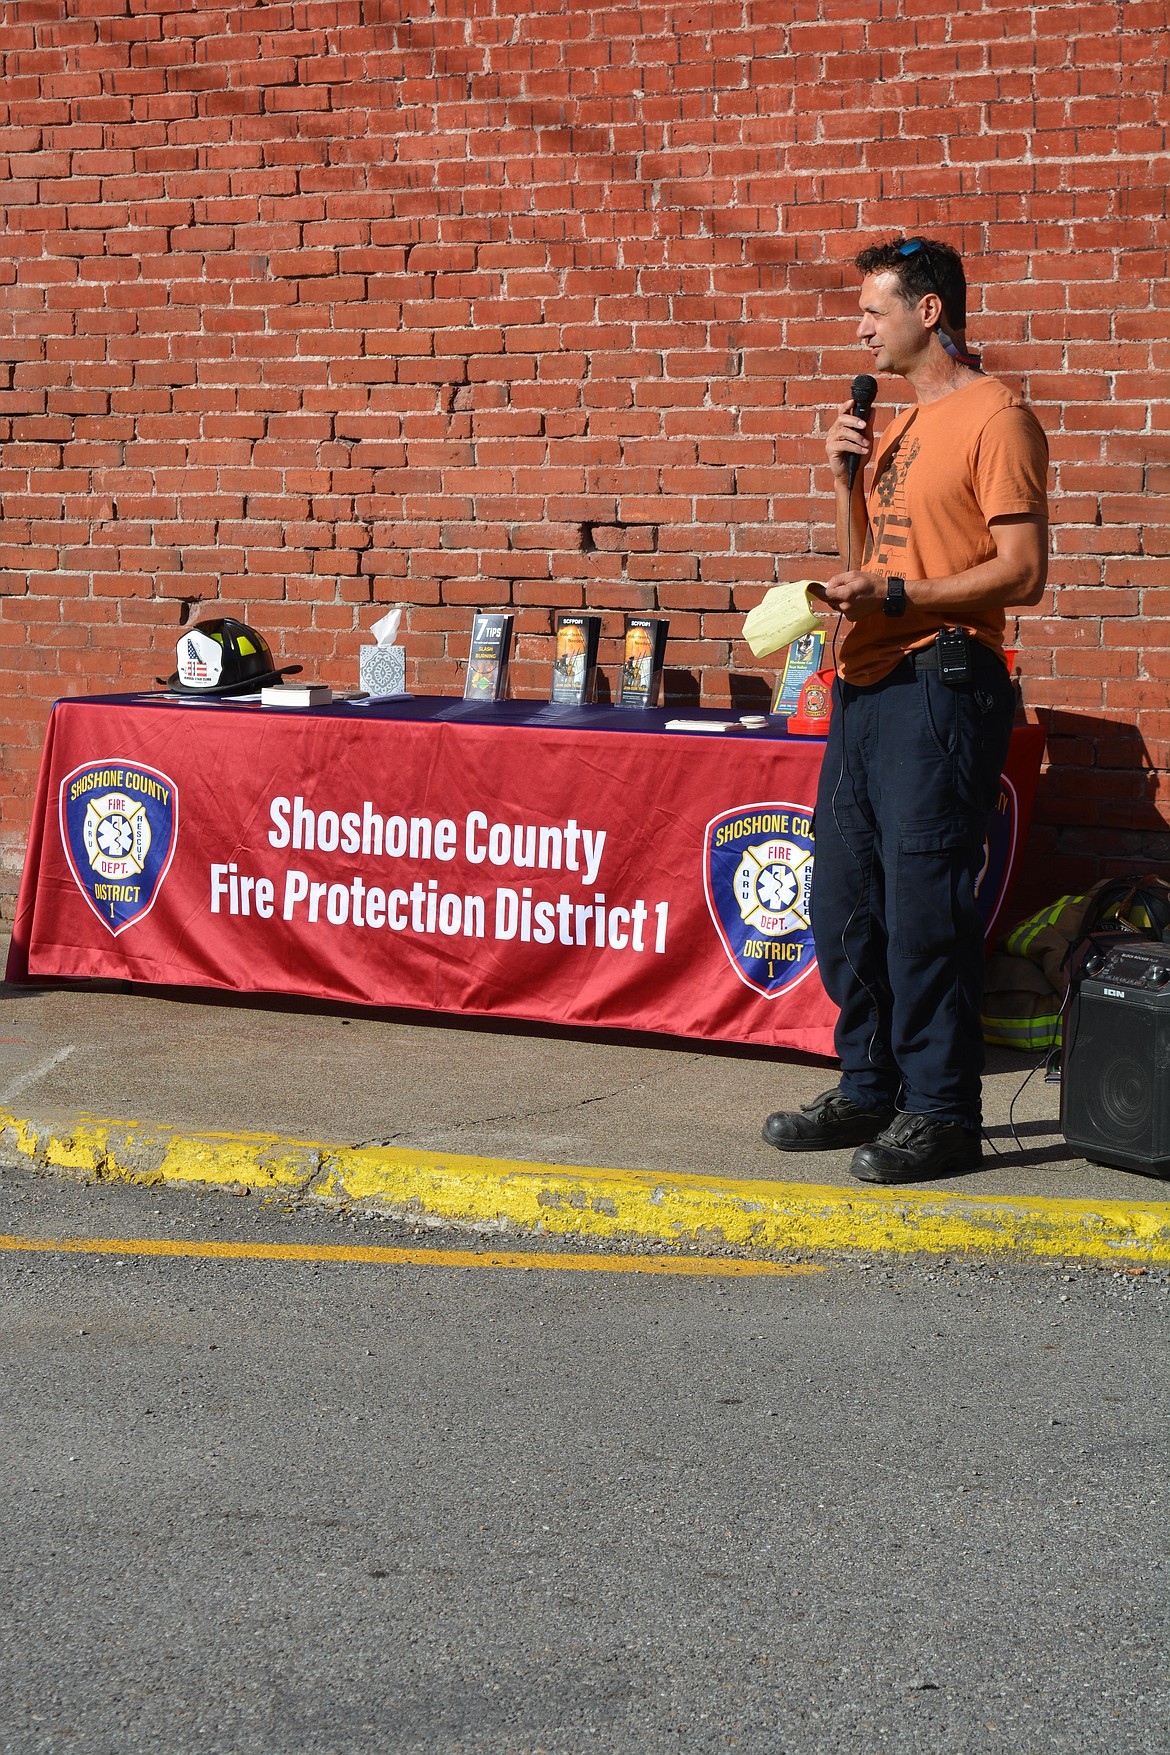 Shoshone County District One Fire Chief John Miller speaks to the participants before the 9/11 stair climb.